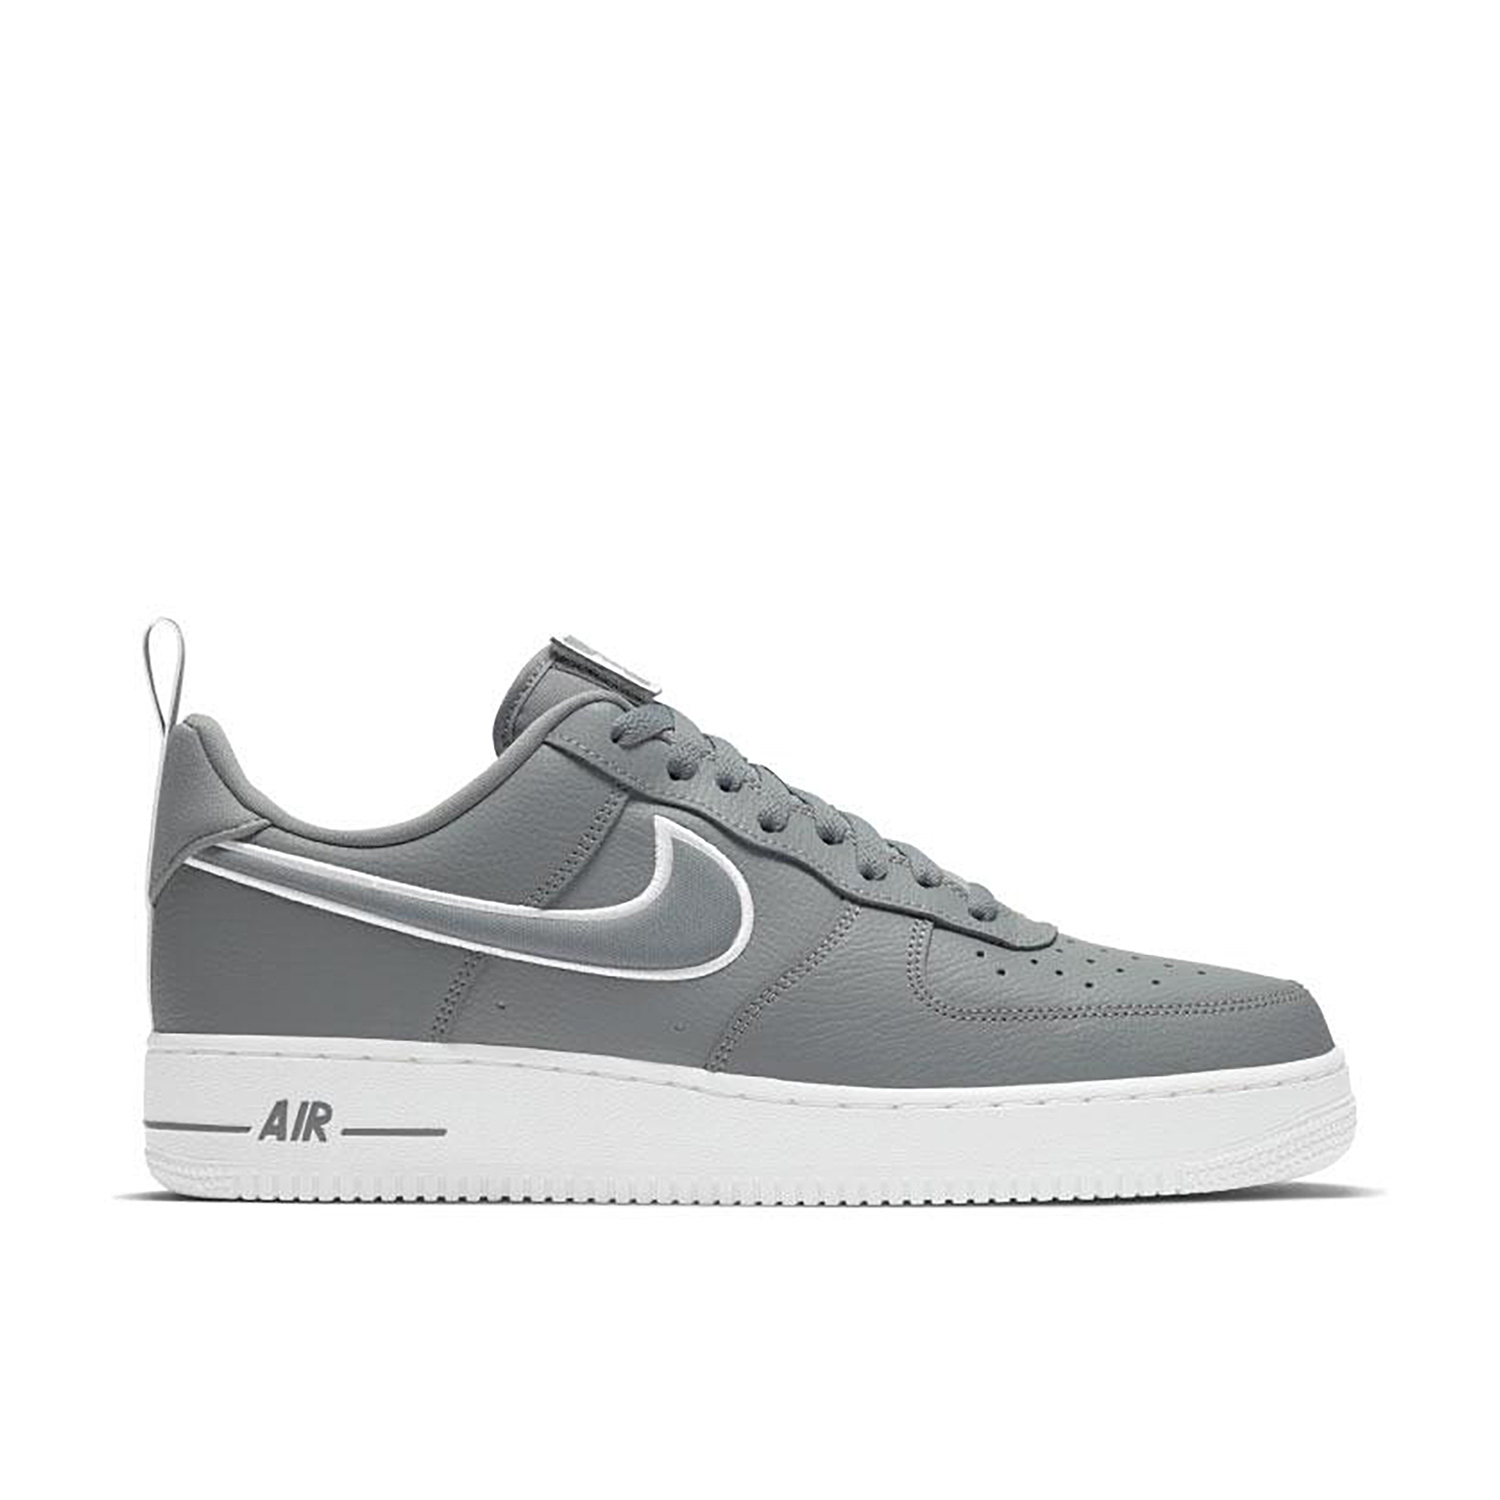 Nike Air Force 1 Raised Swoosh Grey White | DH2472-002 | Laced